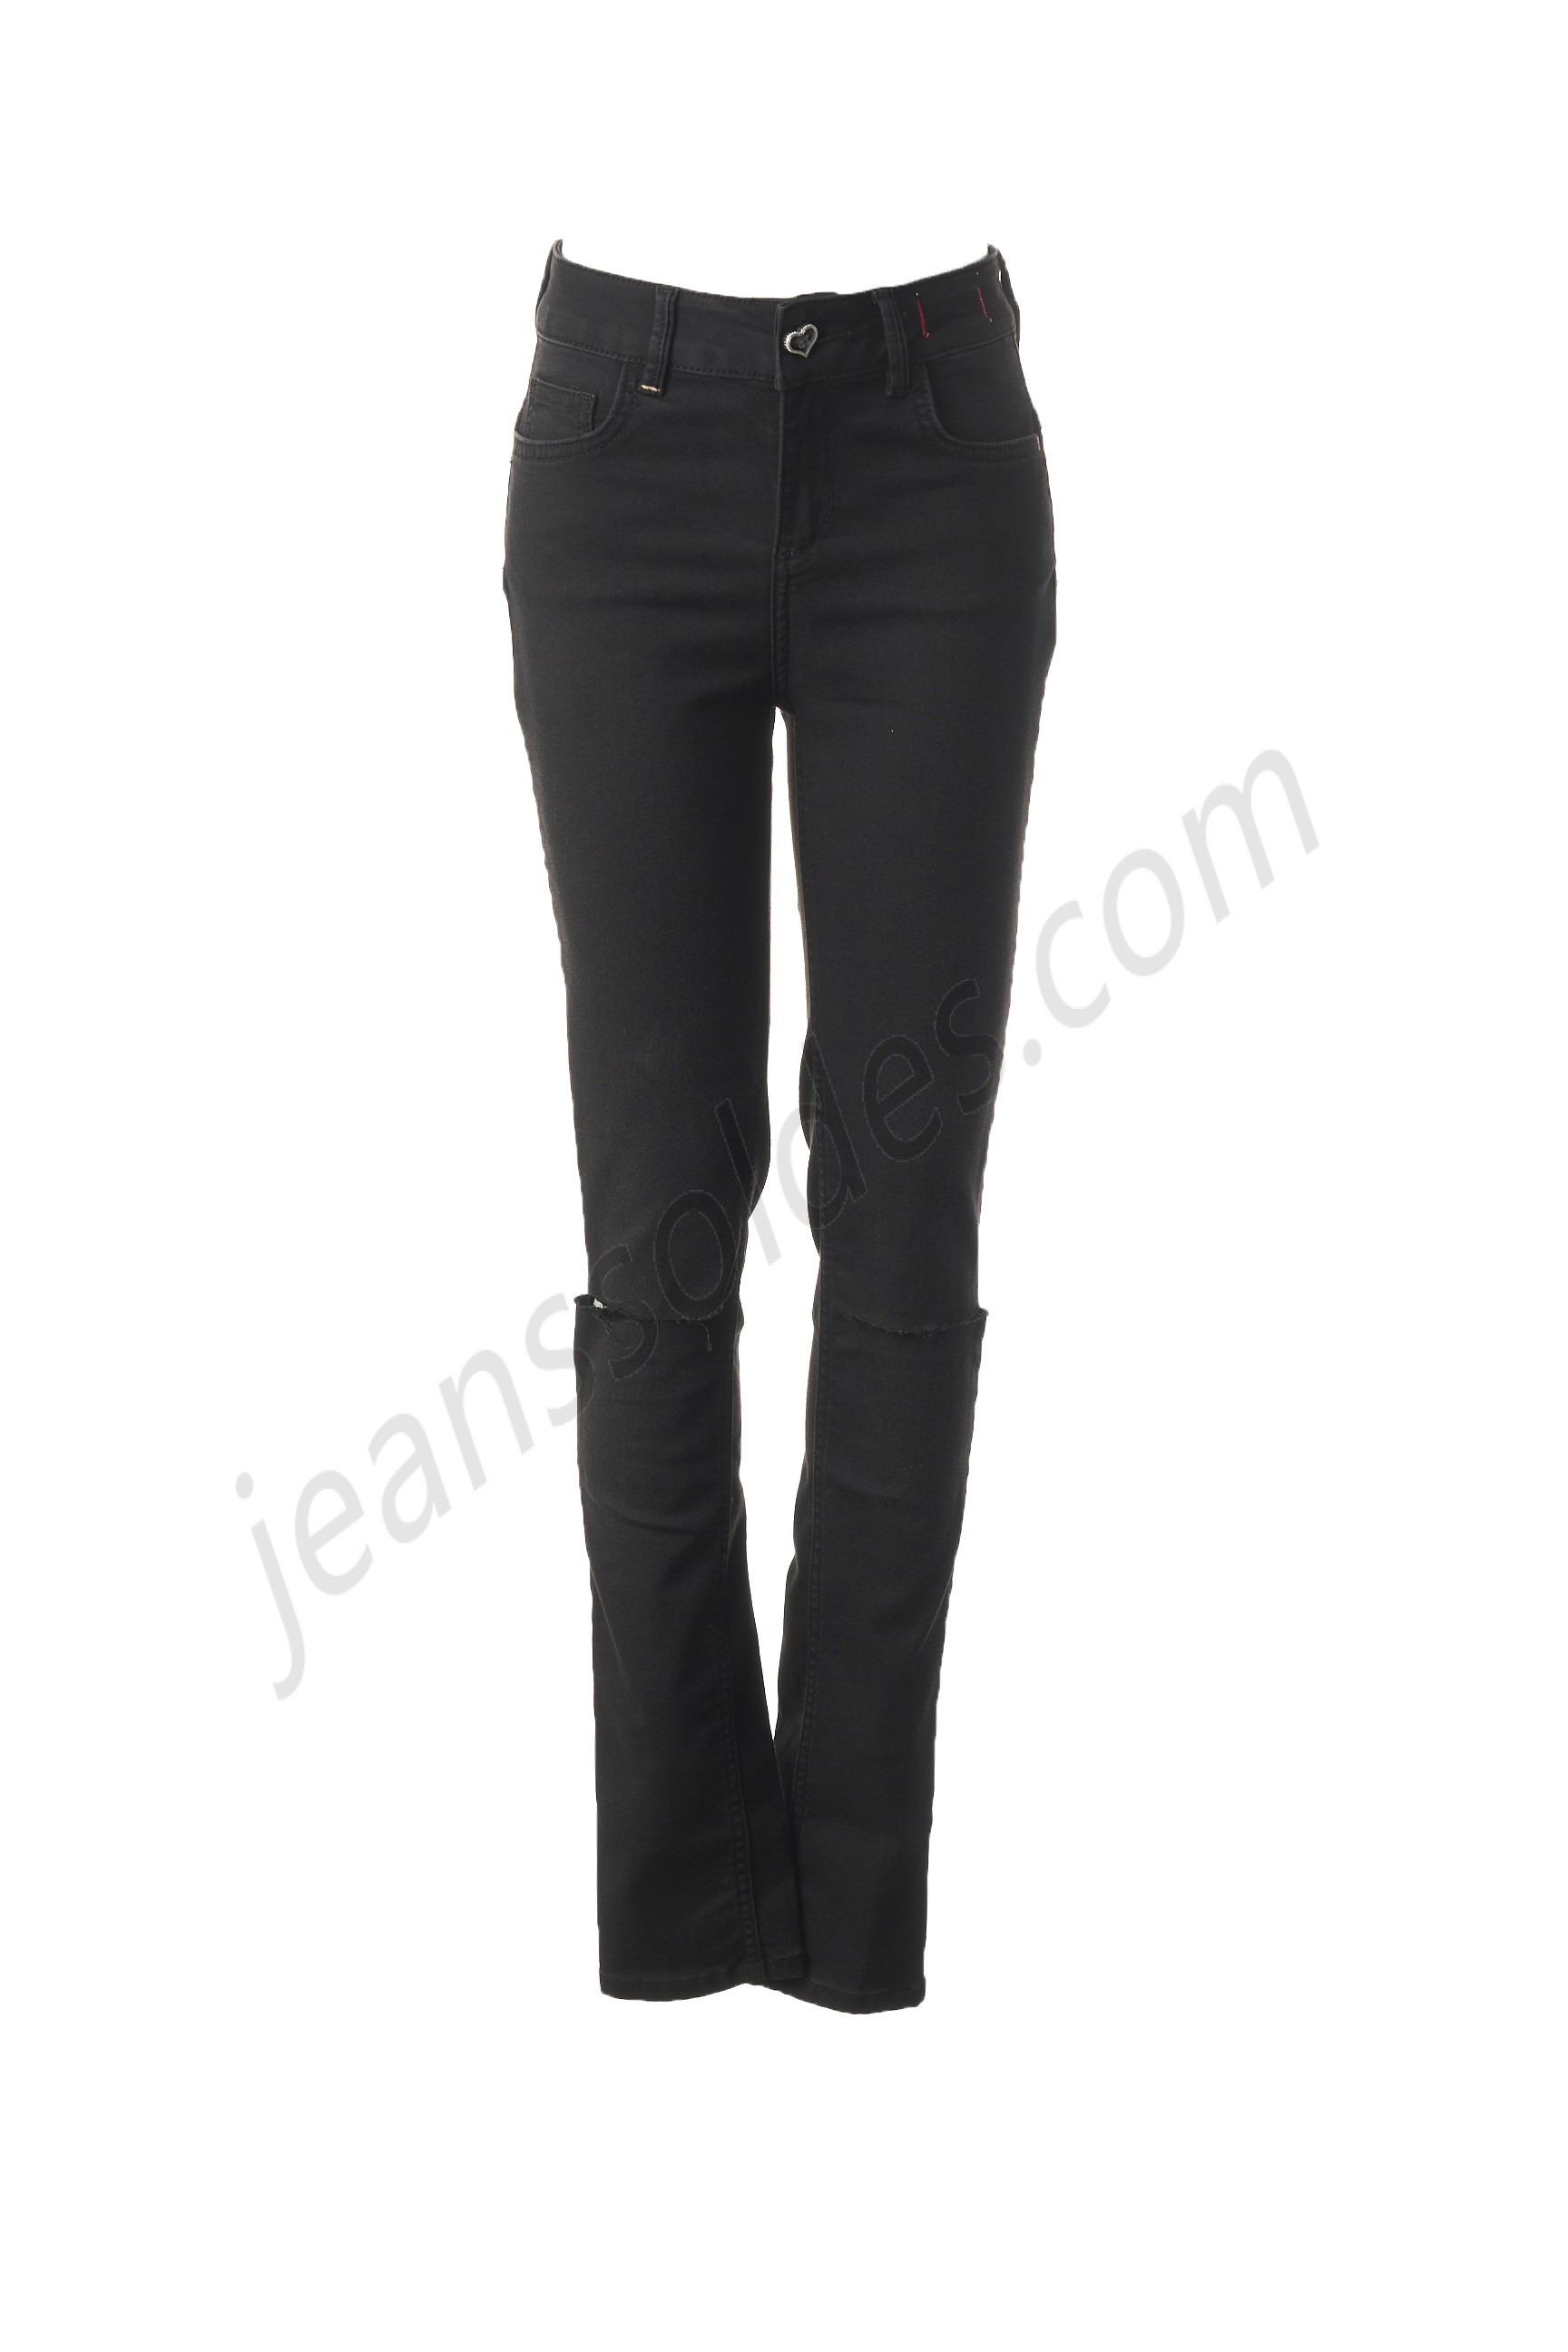 my twin-Jeans coupe slim prix d’amis - my twin-Jeans coupe slim prix d’amis